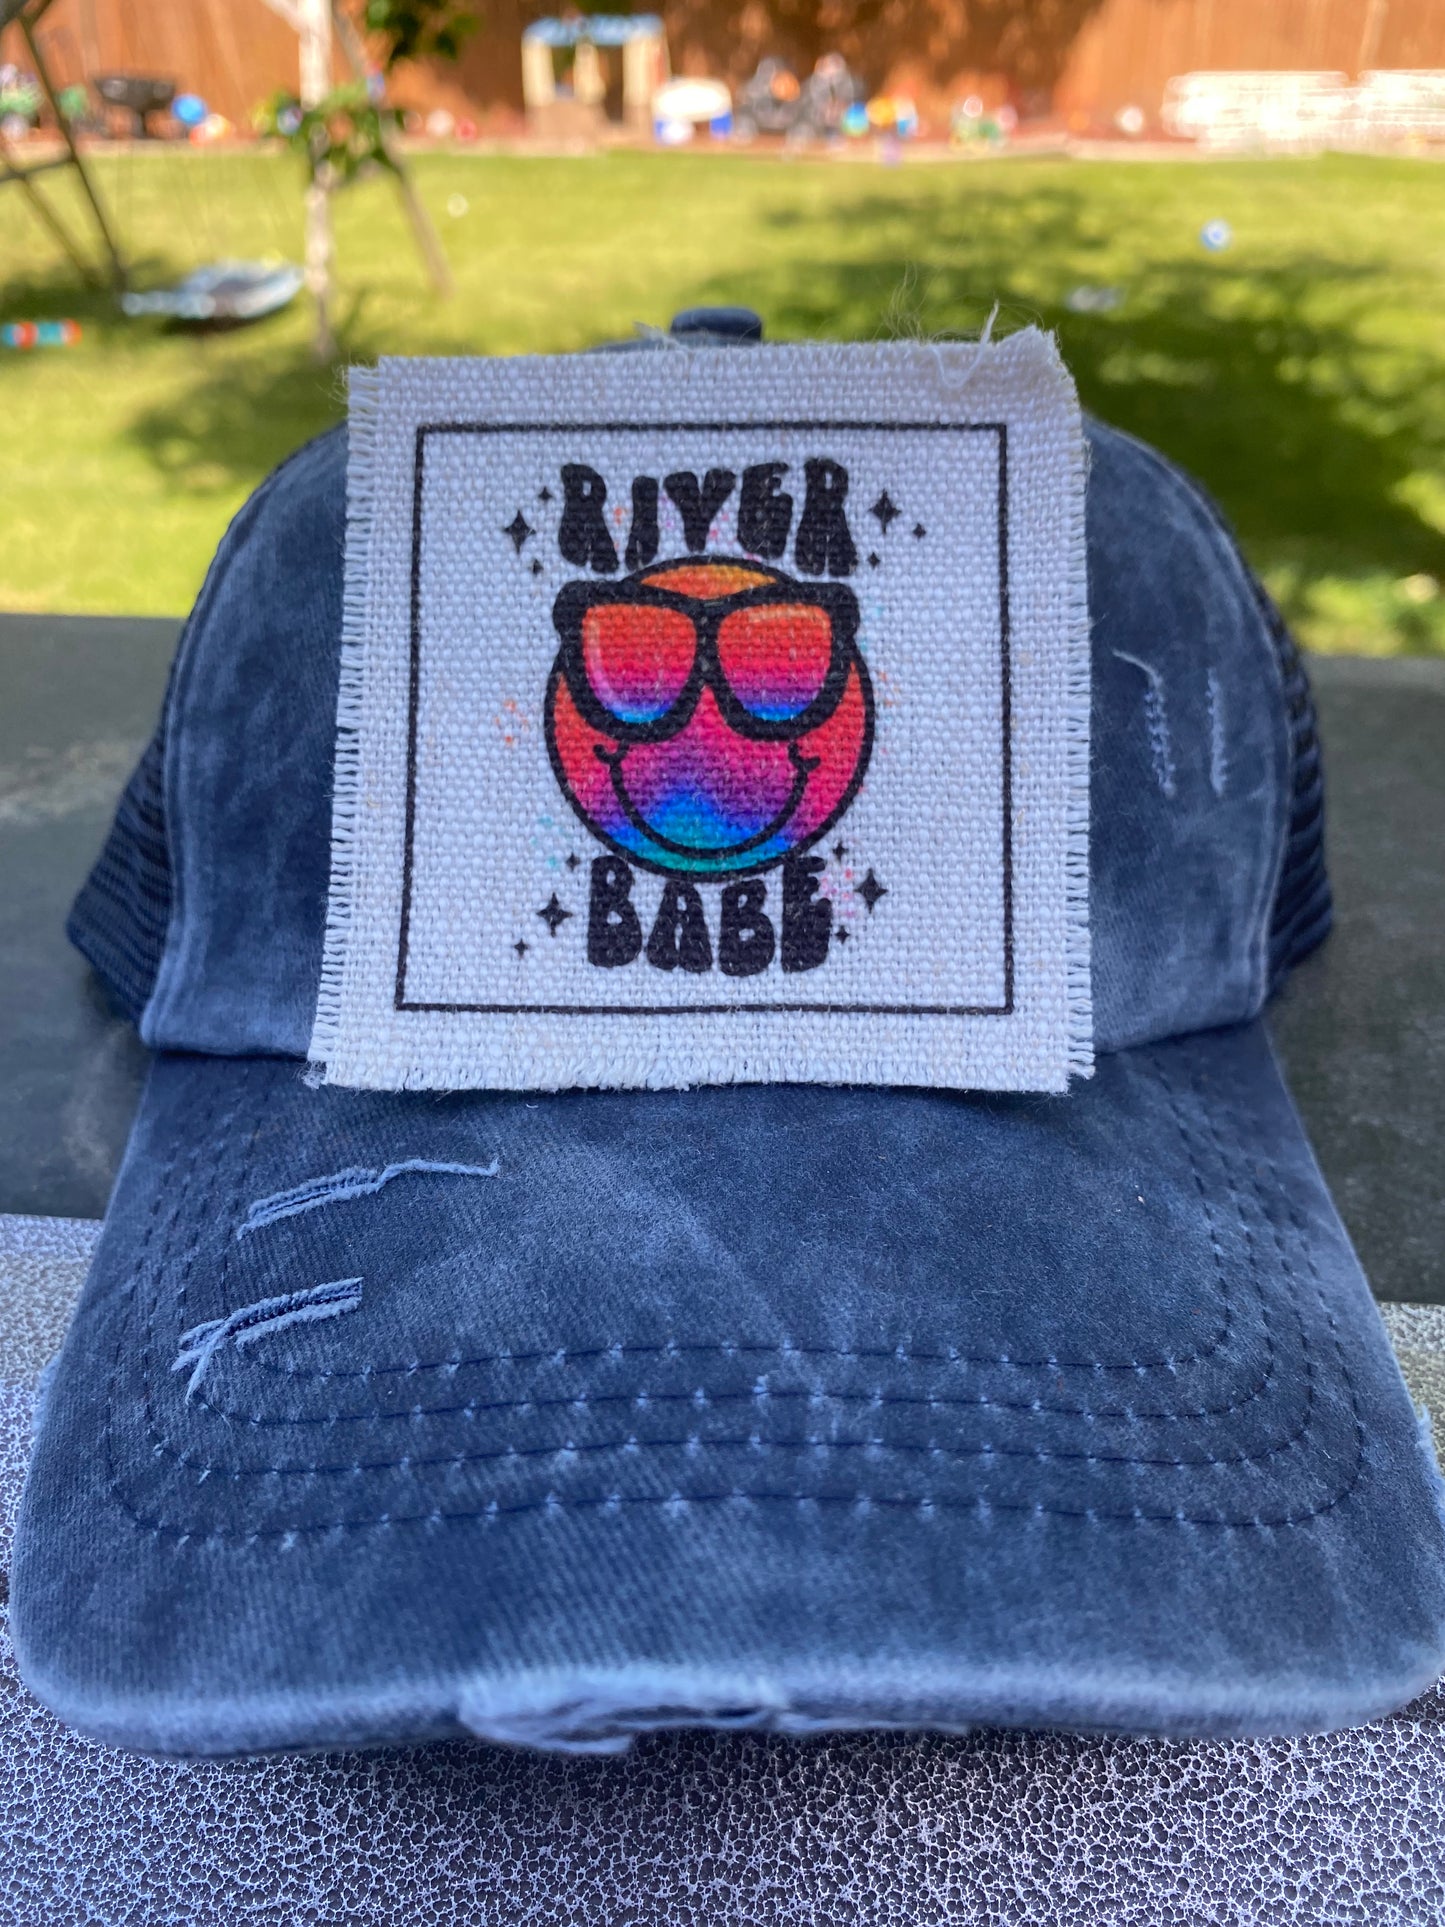 River Babe Rainbow Smiley Hat Patch